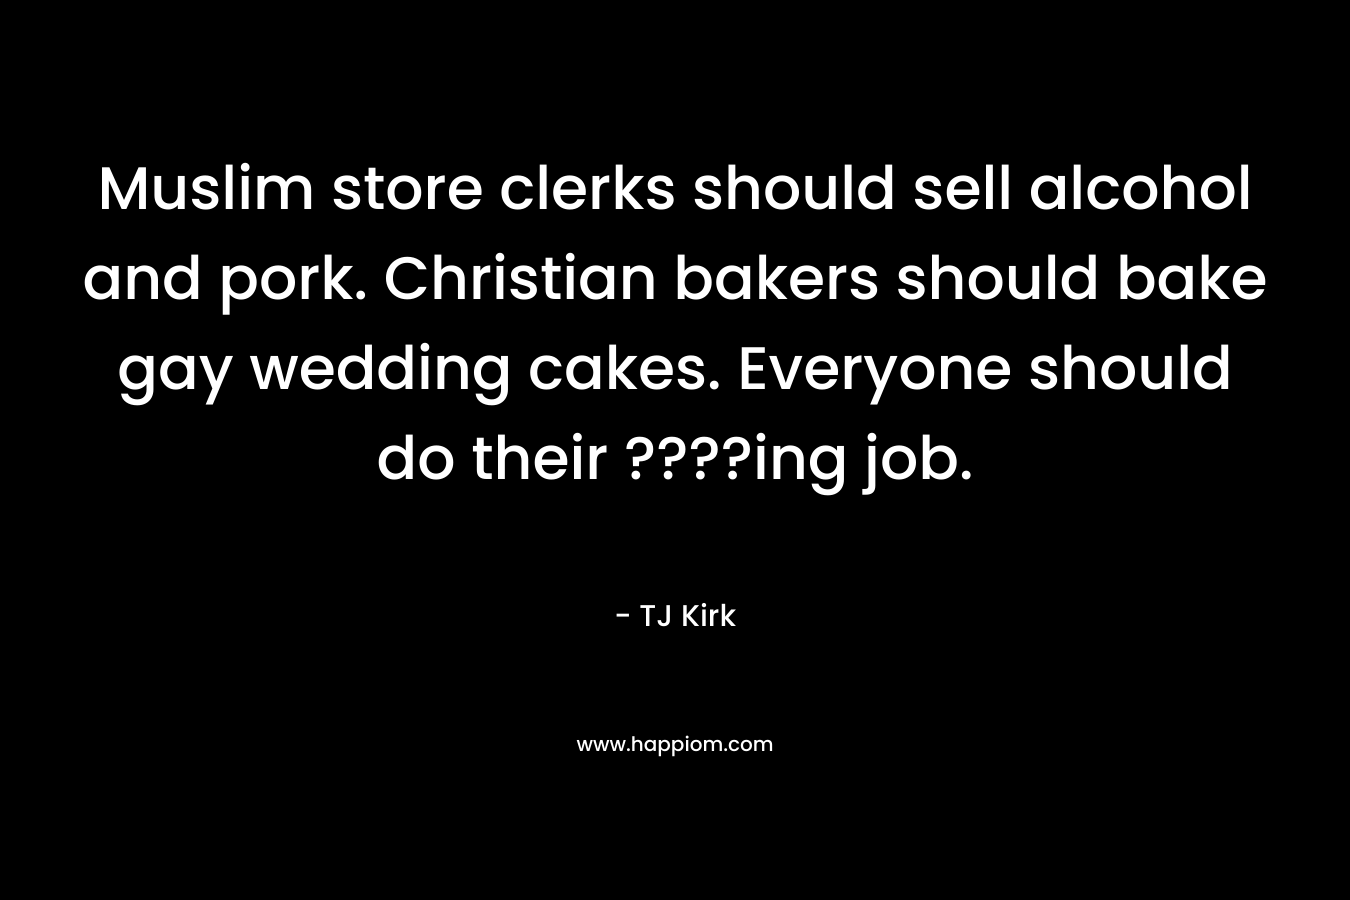 Muslim store clerks should sell alcohol and pork. Christian bakers should bake gay wedding cakes. Everyone should do their ????ing job. – TJ Kirk